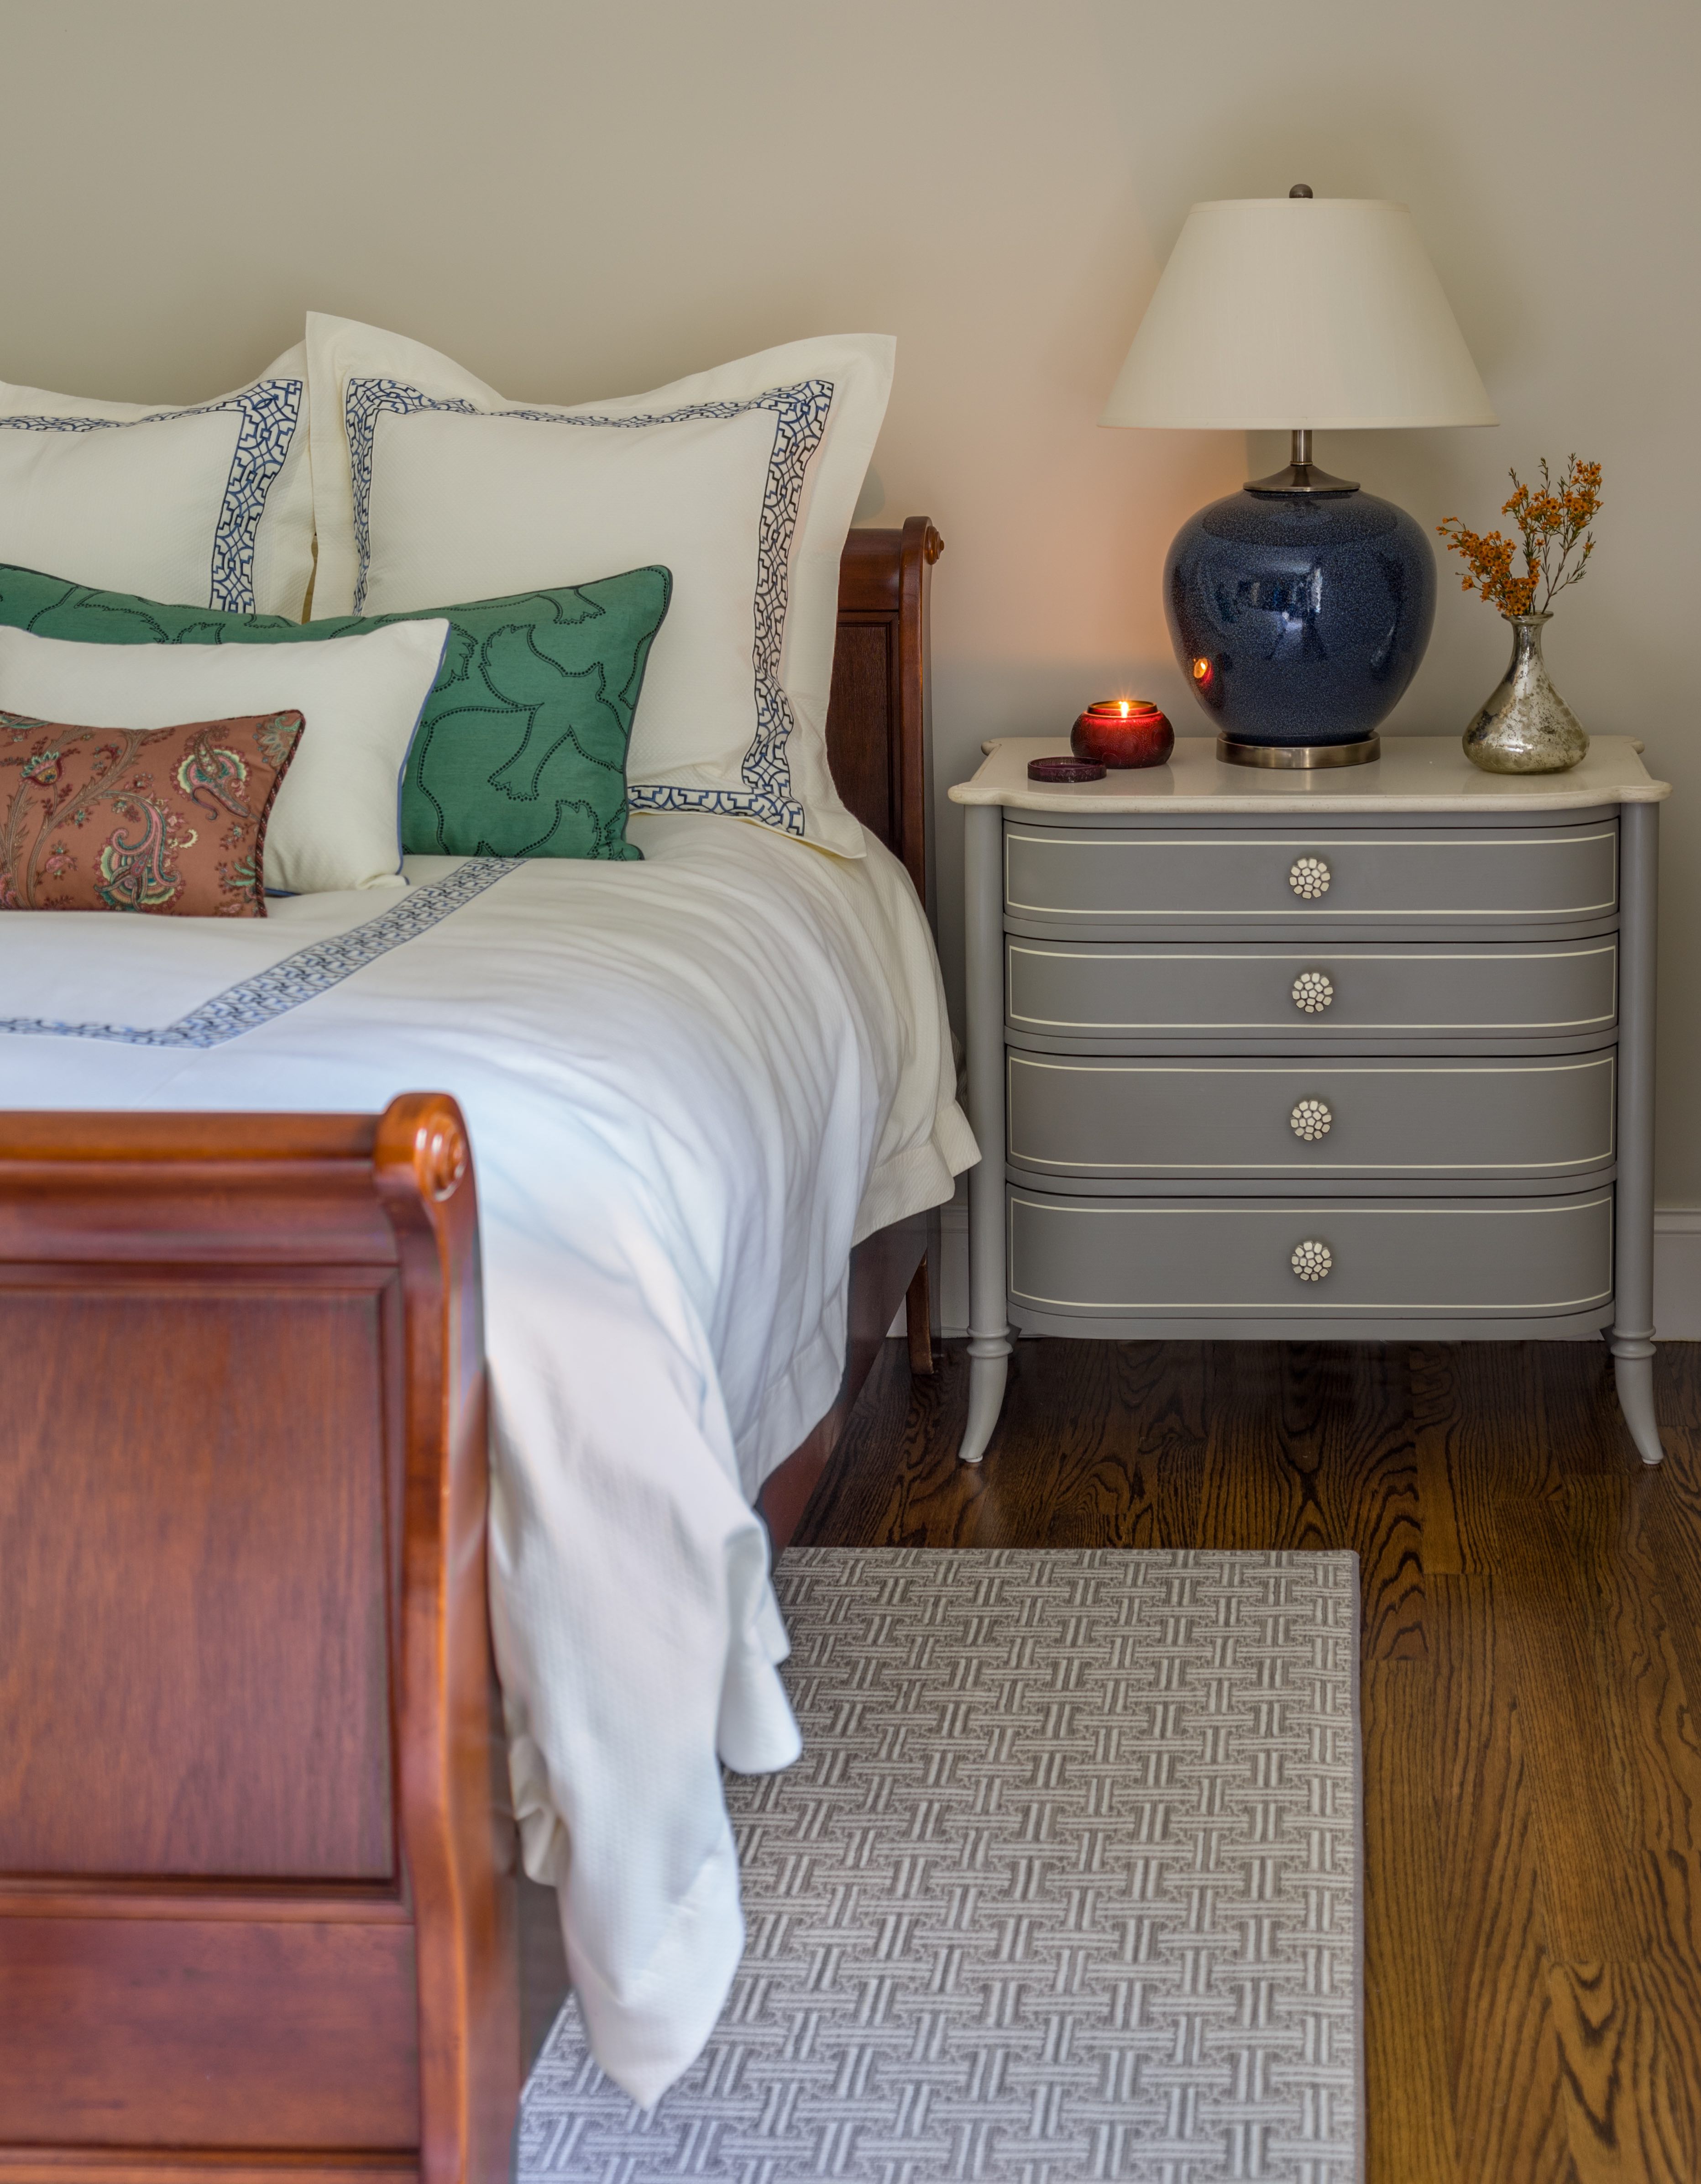 Wellesley Master Bedroom Reveal | Kelly Rogers Interiors | Interiors for Families